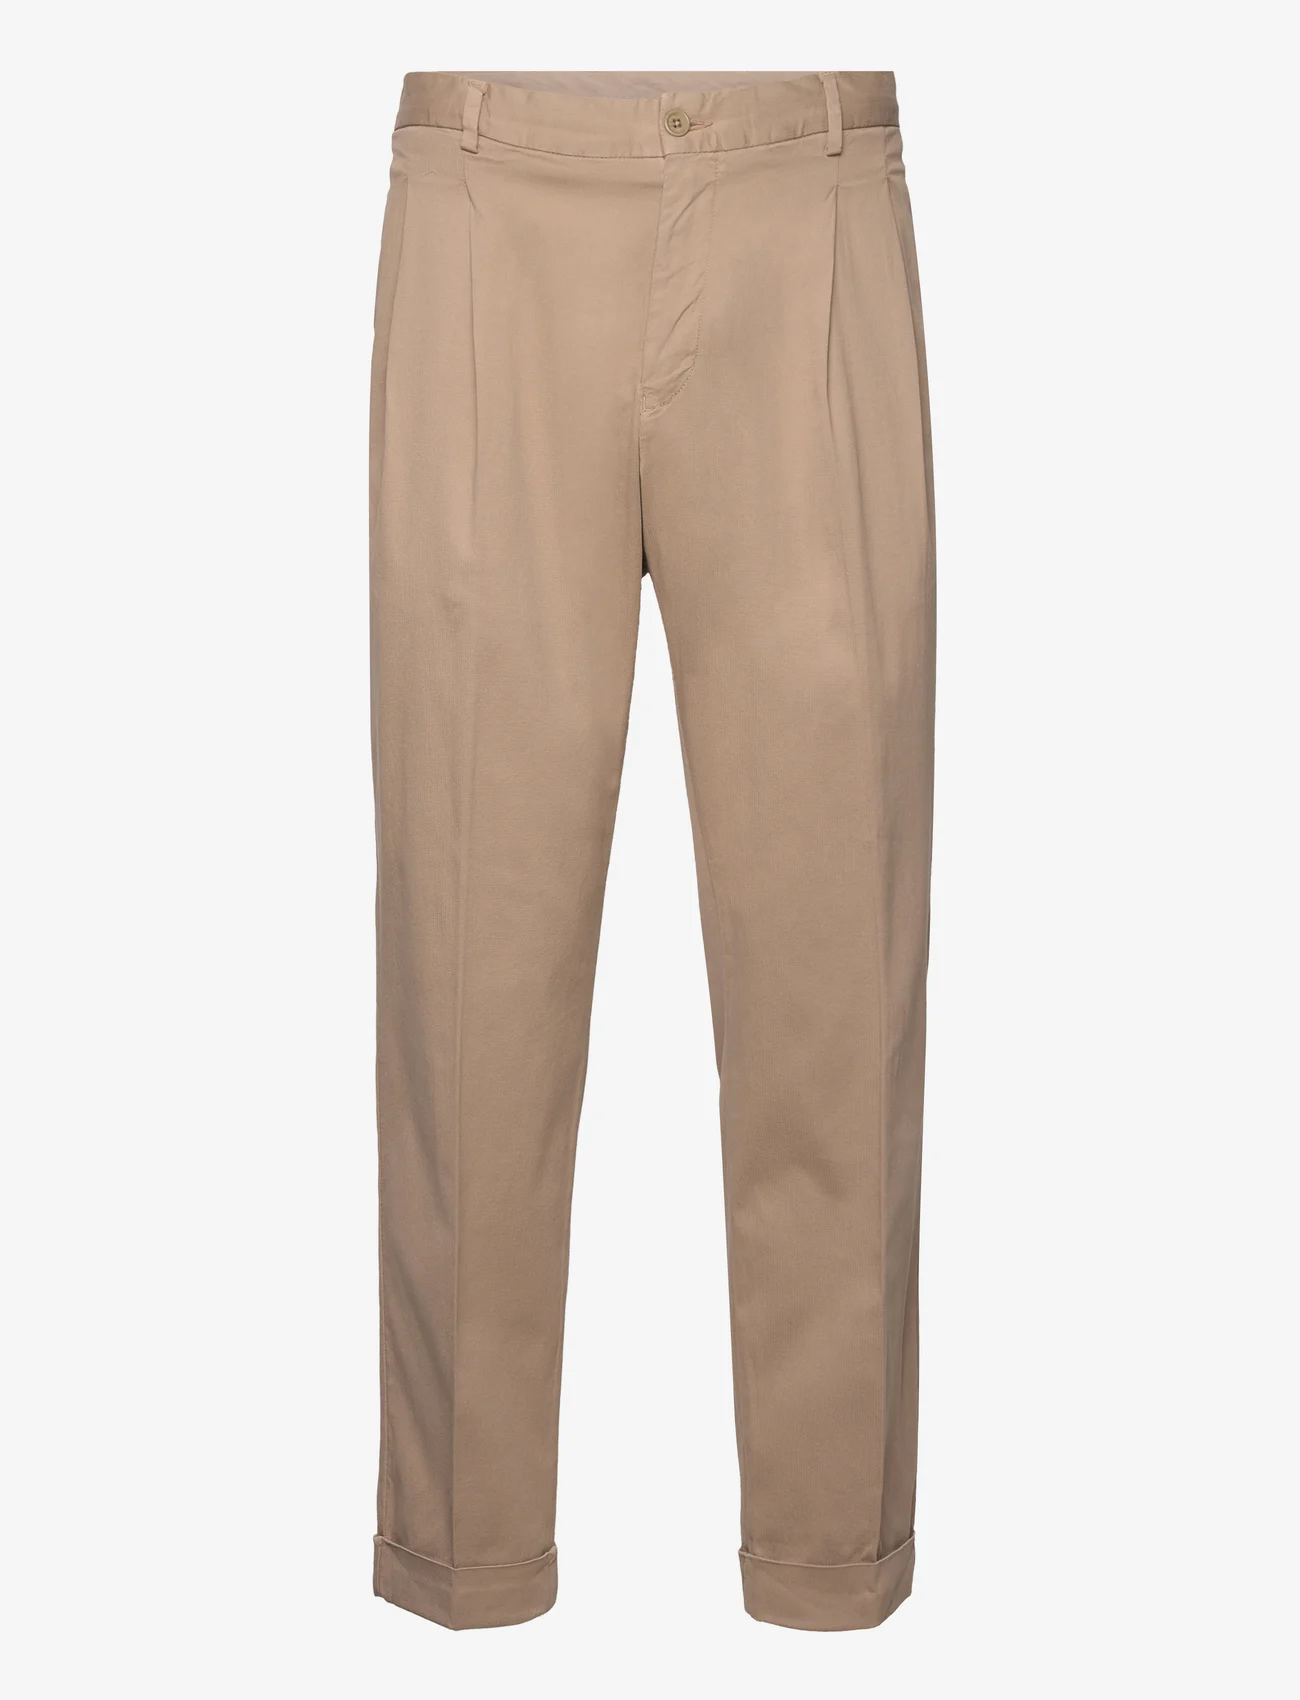 GANT - RELAXED TAPERED COTTON SUIT PANTS - chino stila bikses - taupe beige - 0